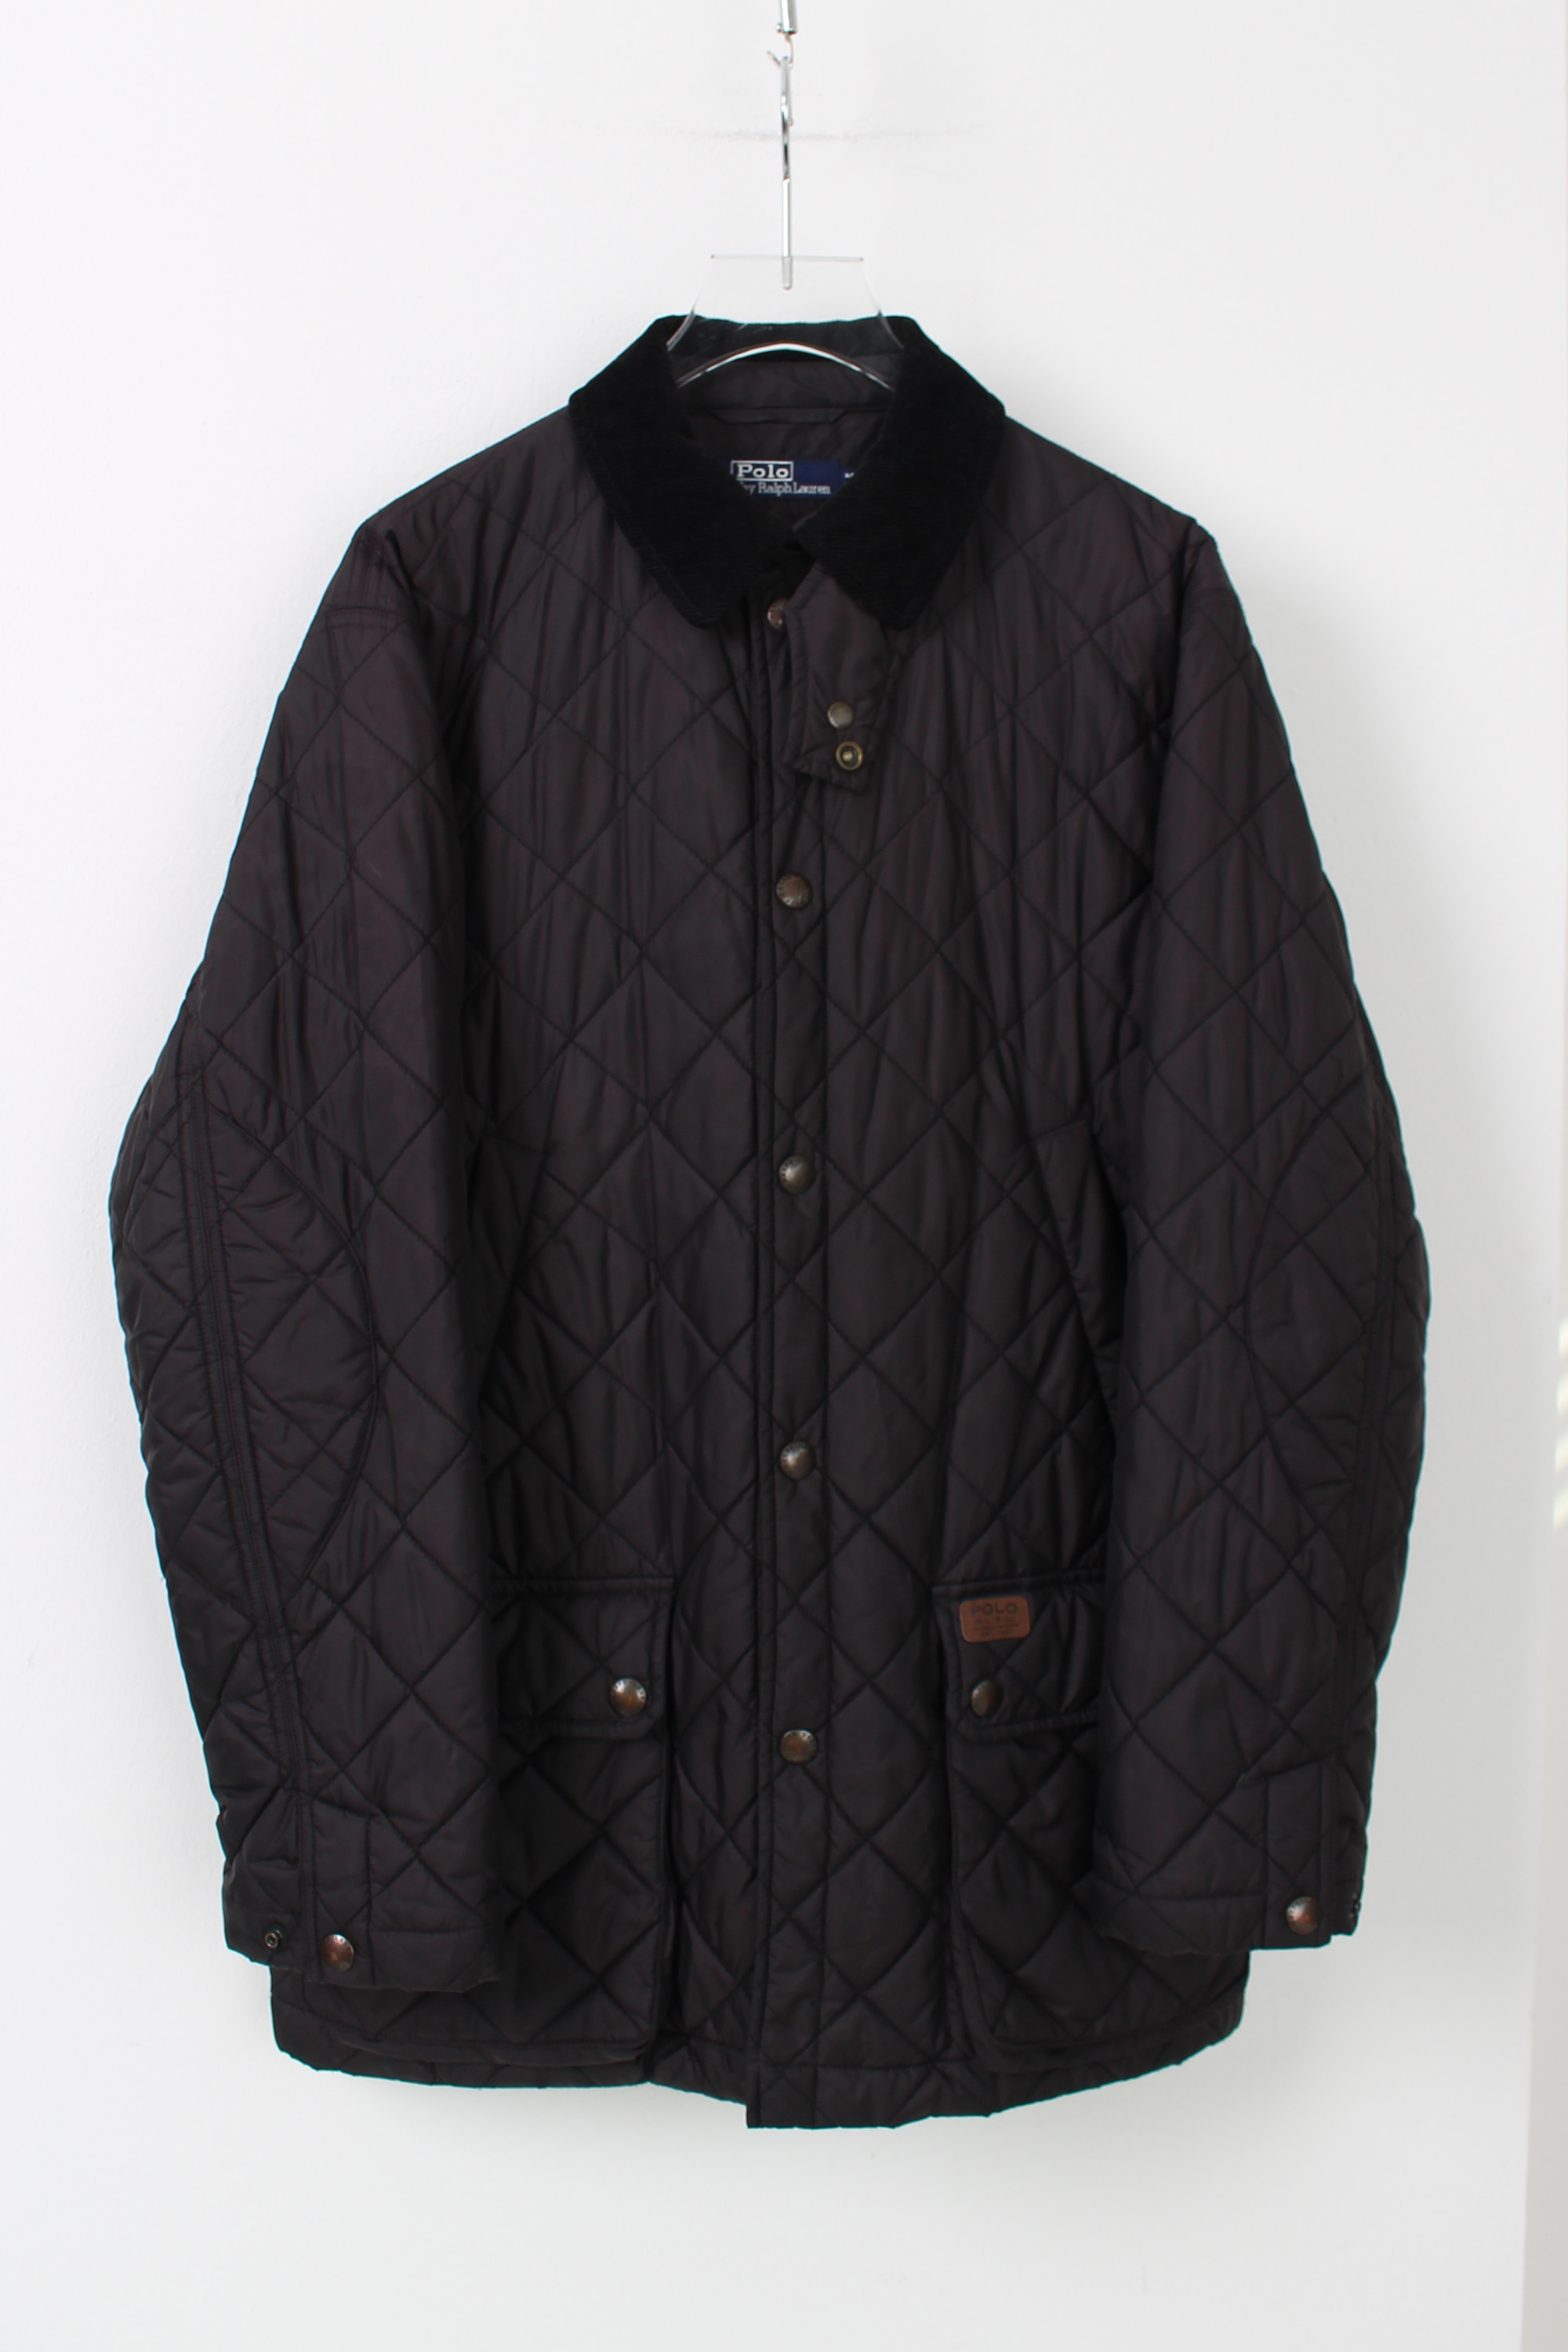 POLO Ralph Lauren quilted jacket